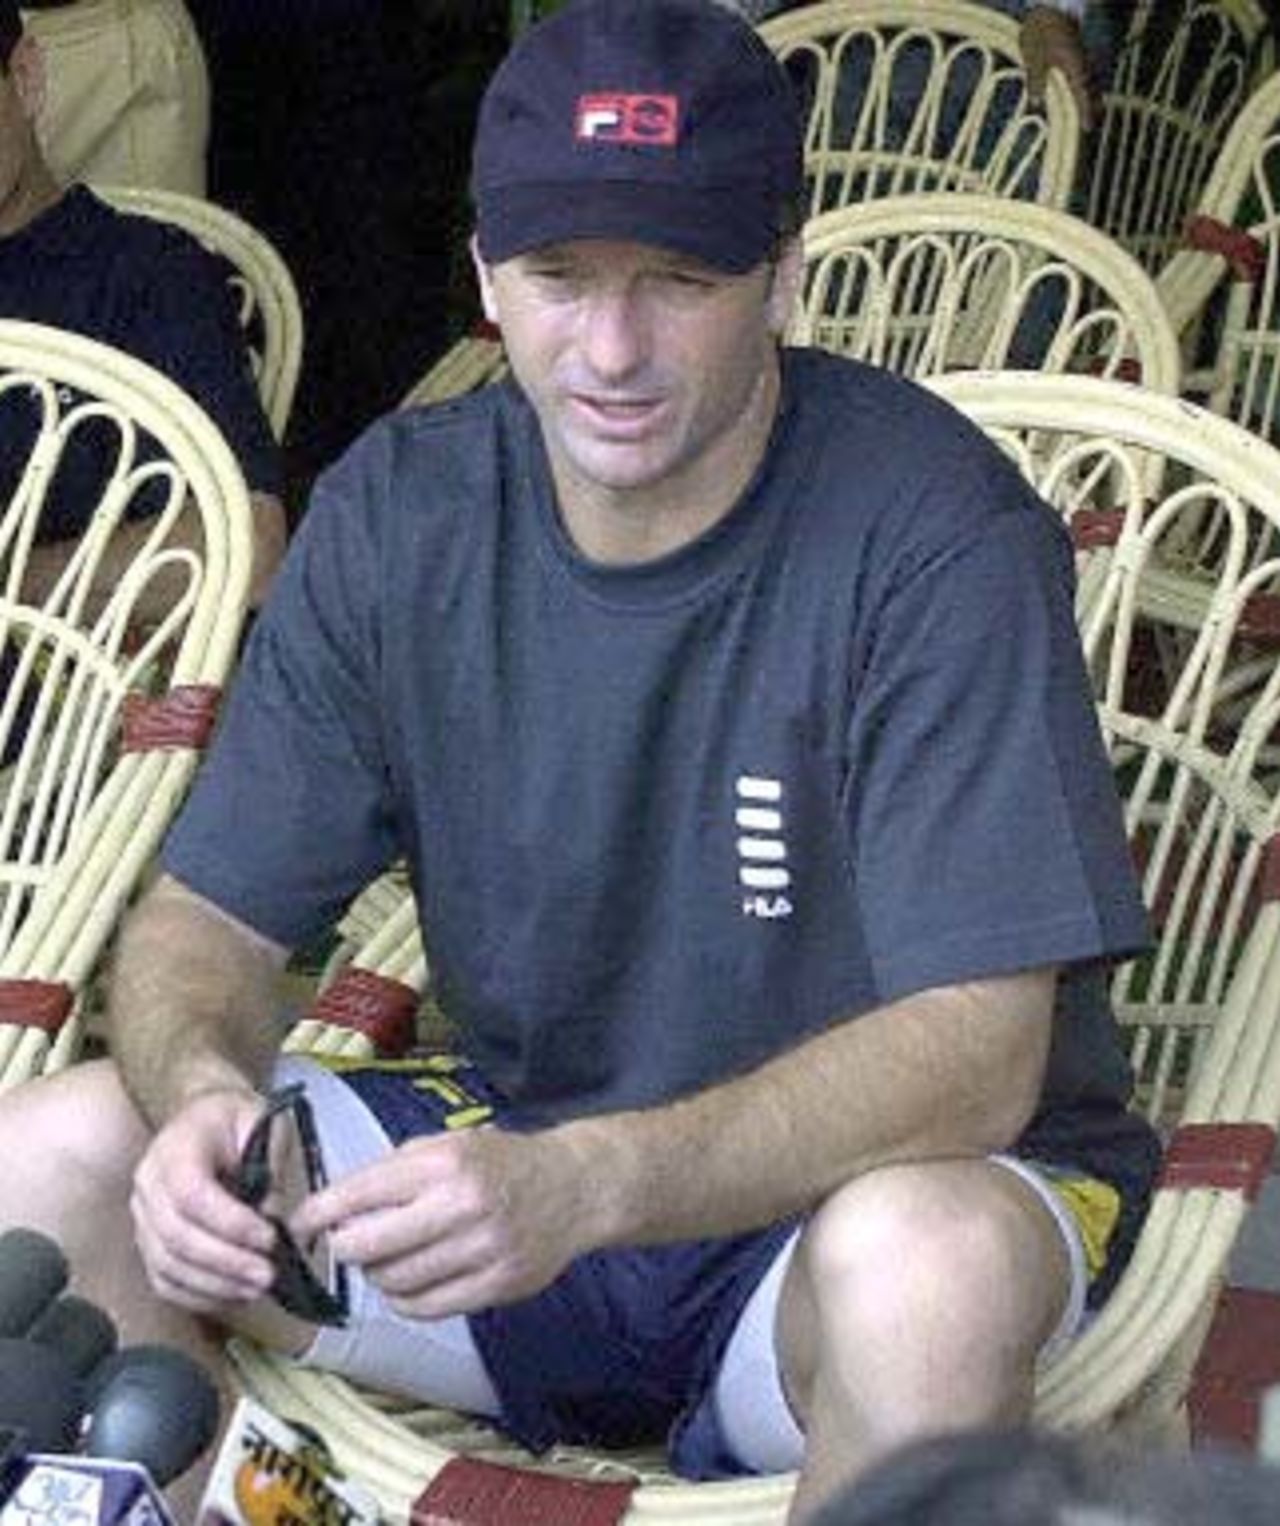 Australian cricket captain Steve Waugh speaks to reporters at the Nagpur stadium 16 February 2001. Waugh said Australia was ready to take on India no matter the playing conditions. Australia faces India A in the first test of their India tour.